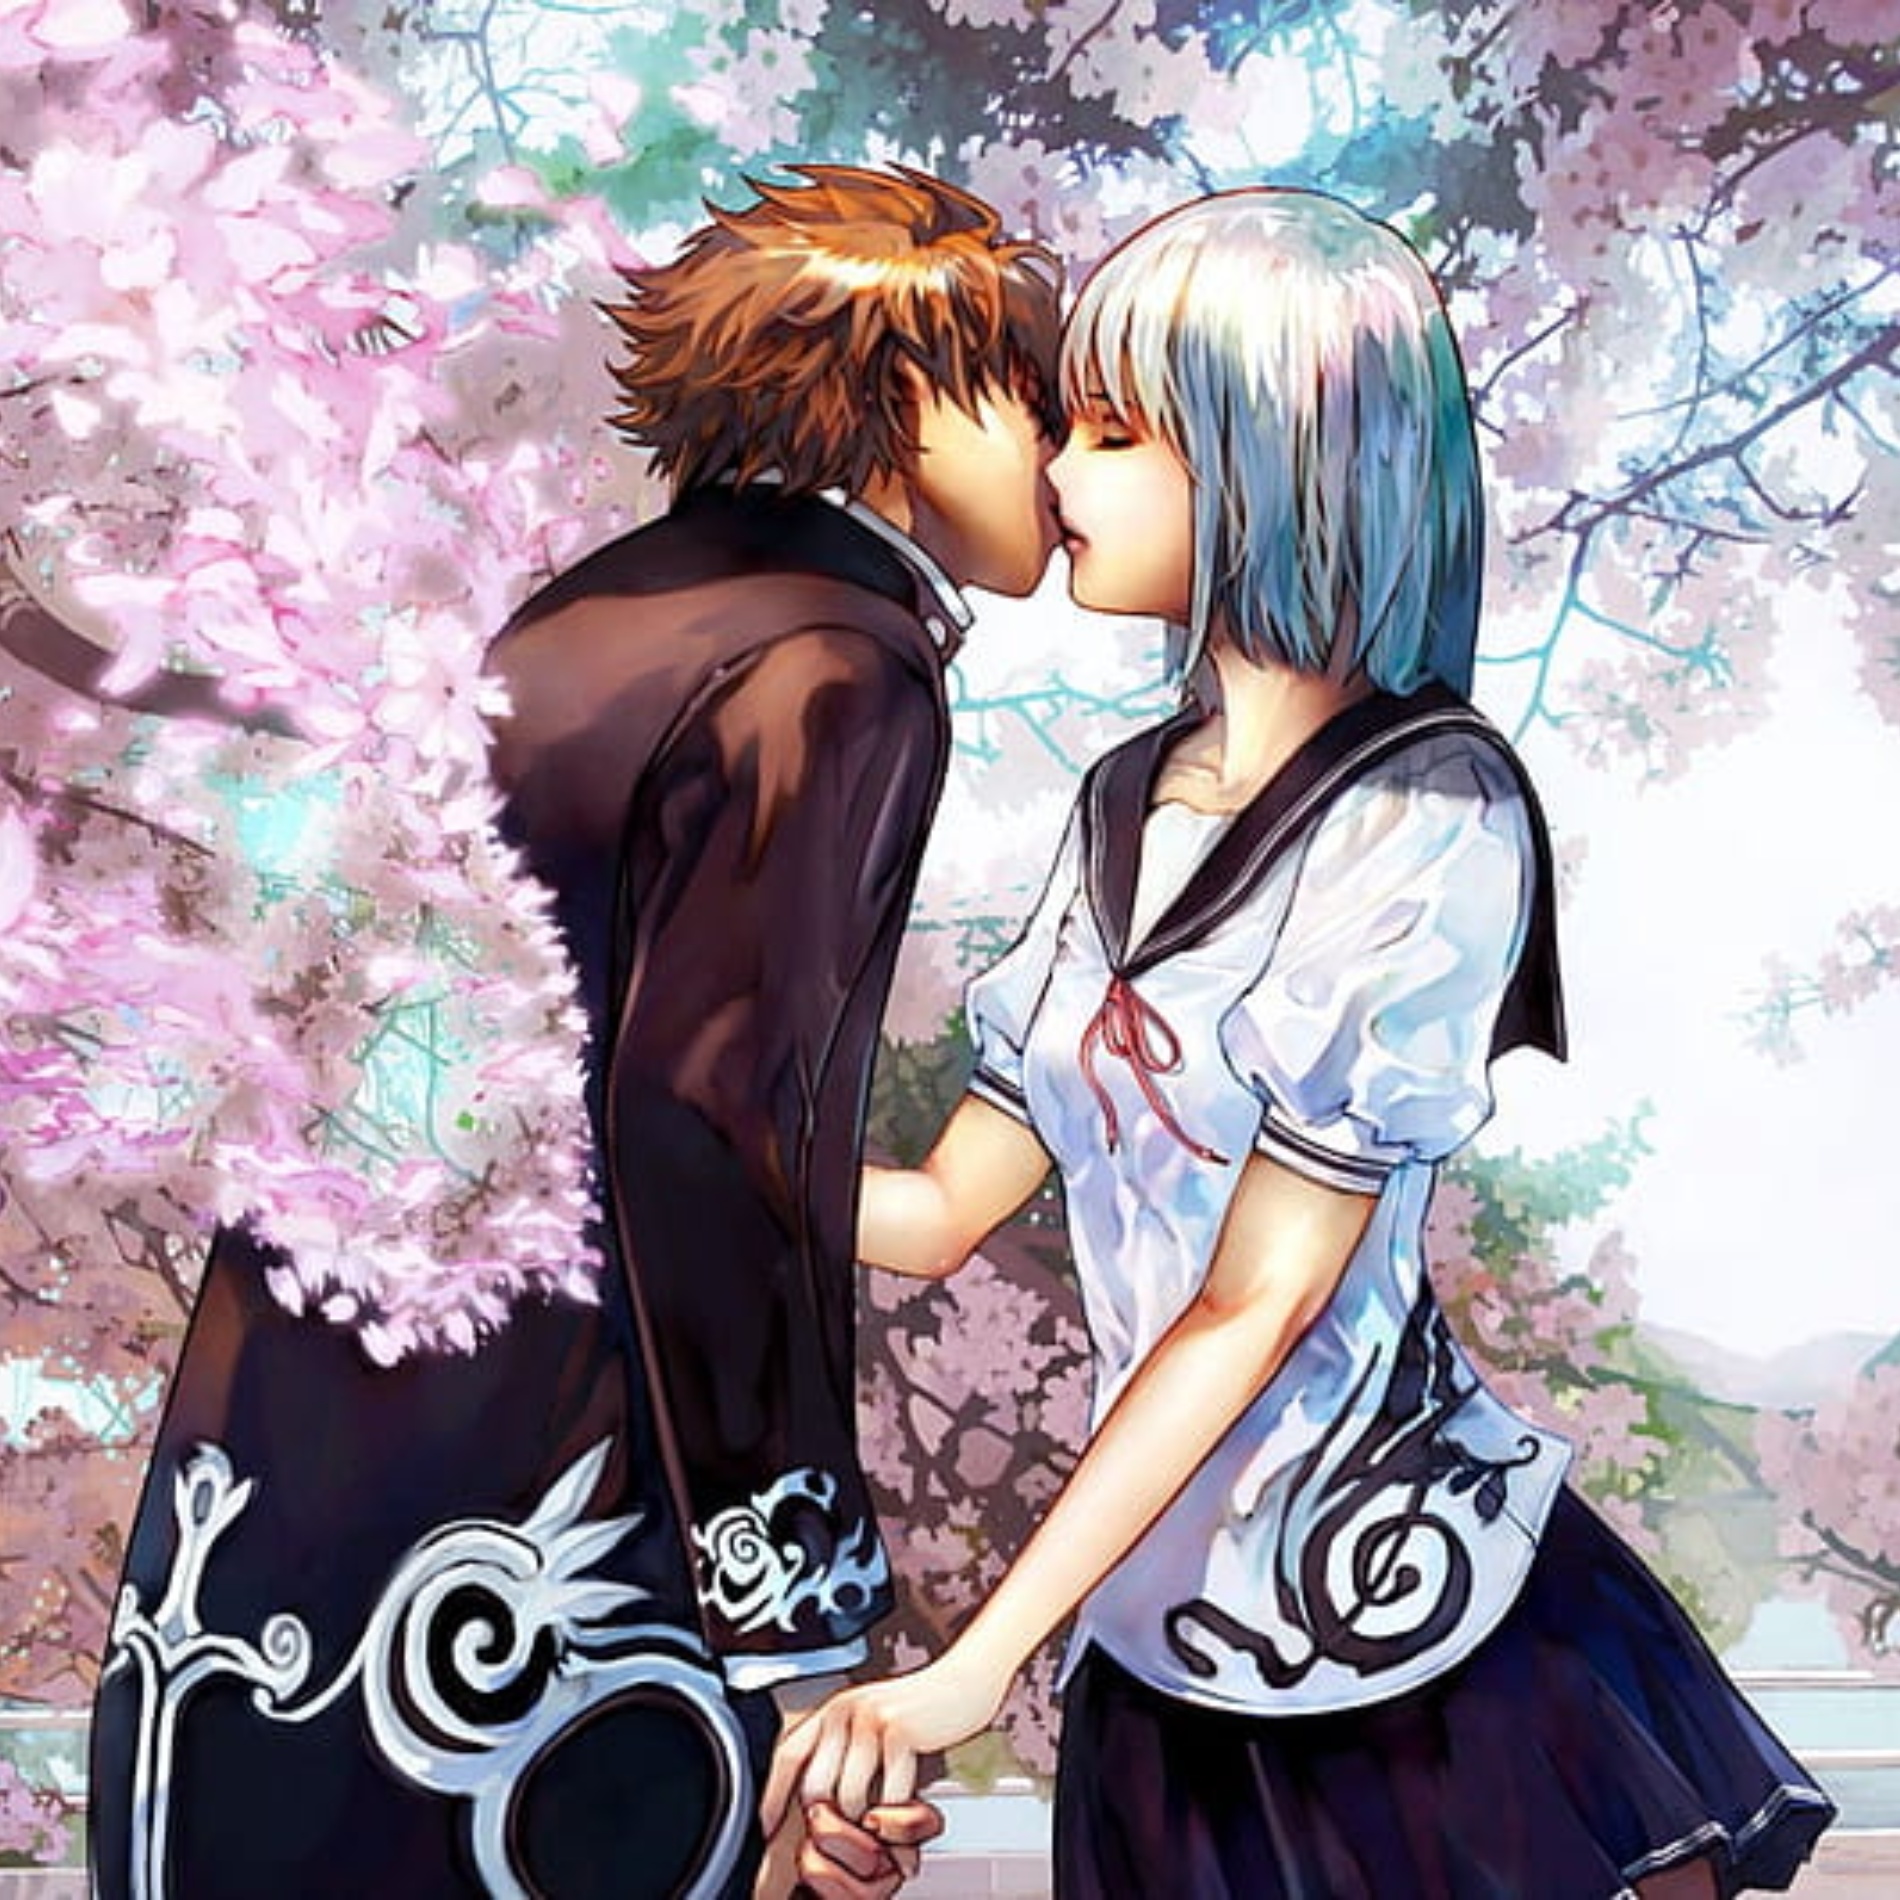 Anime Boy and Girl kiss Profile Picture